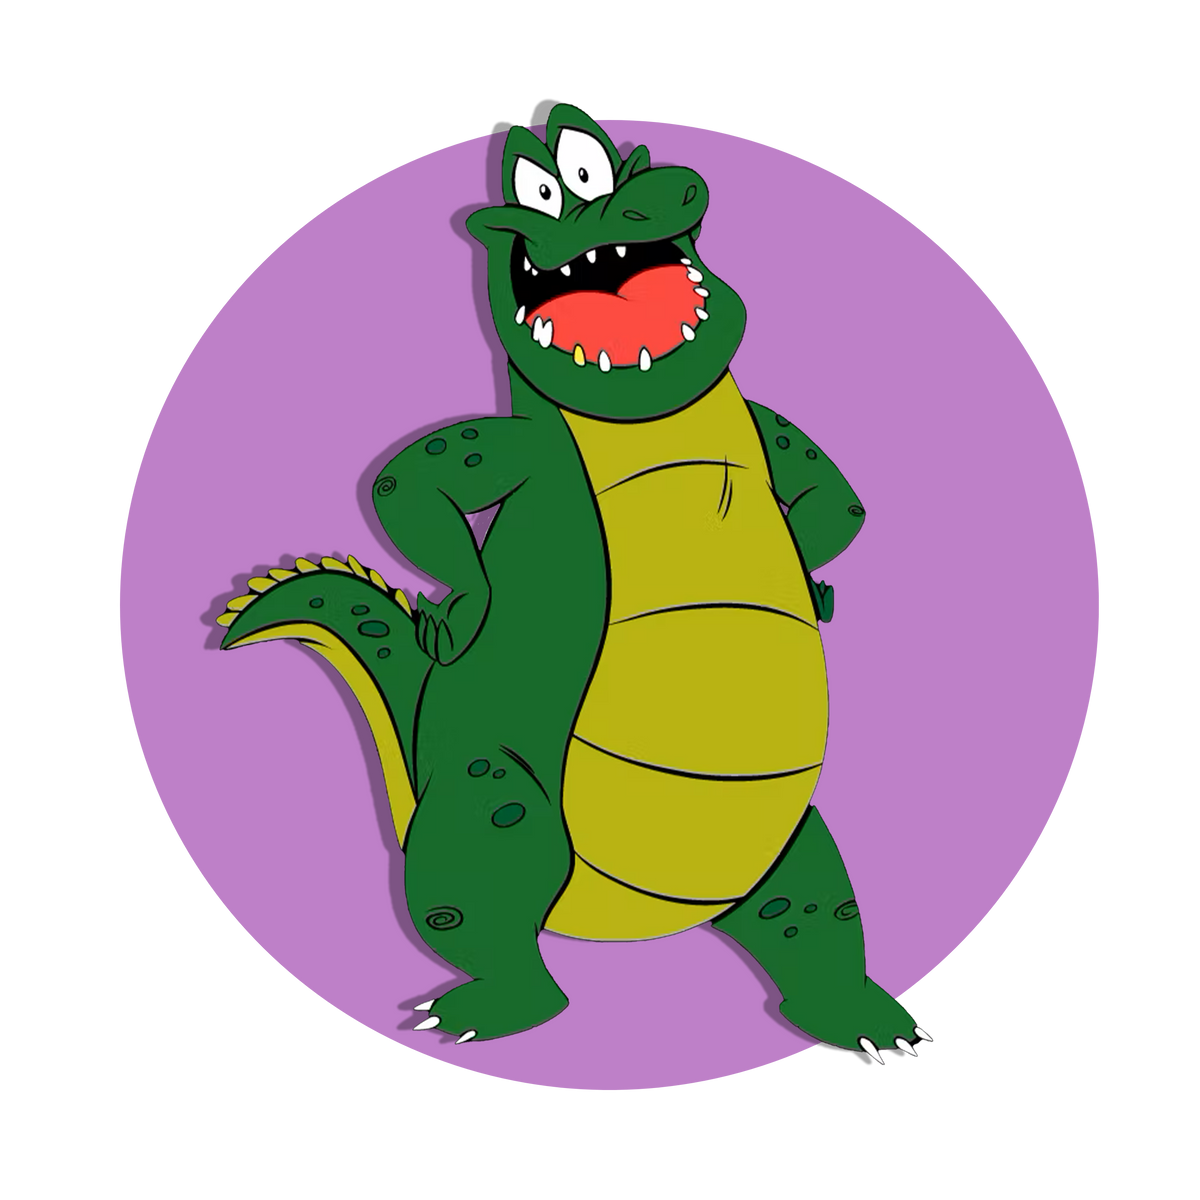 a cartoon alligator standing upright on two legs. It has a yellow underbelly and is set against a purple circular background. The alligator is detailed with prominent scales, sharp claws, and a friendly open-mouthed grin, showing its teeth. 